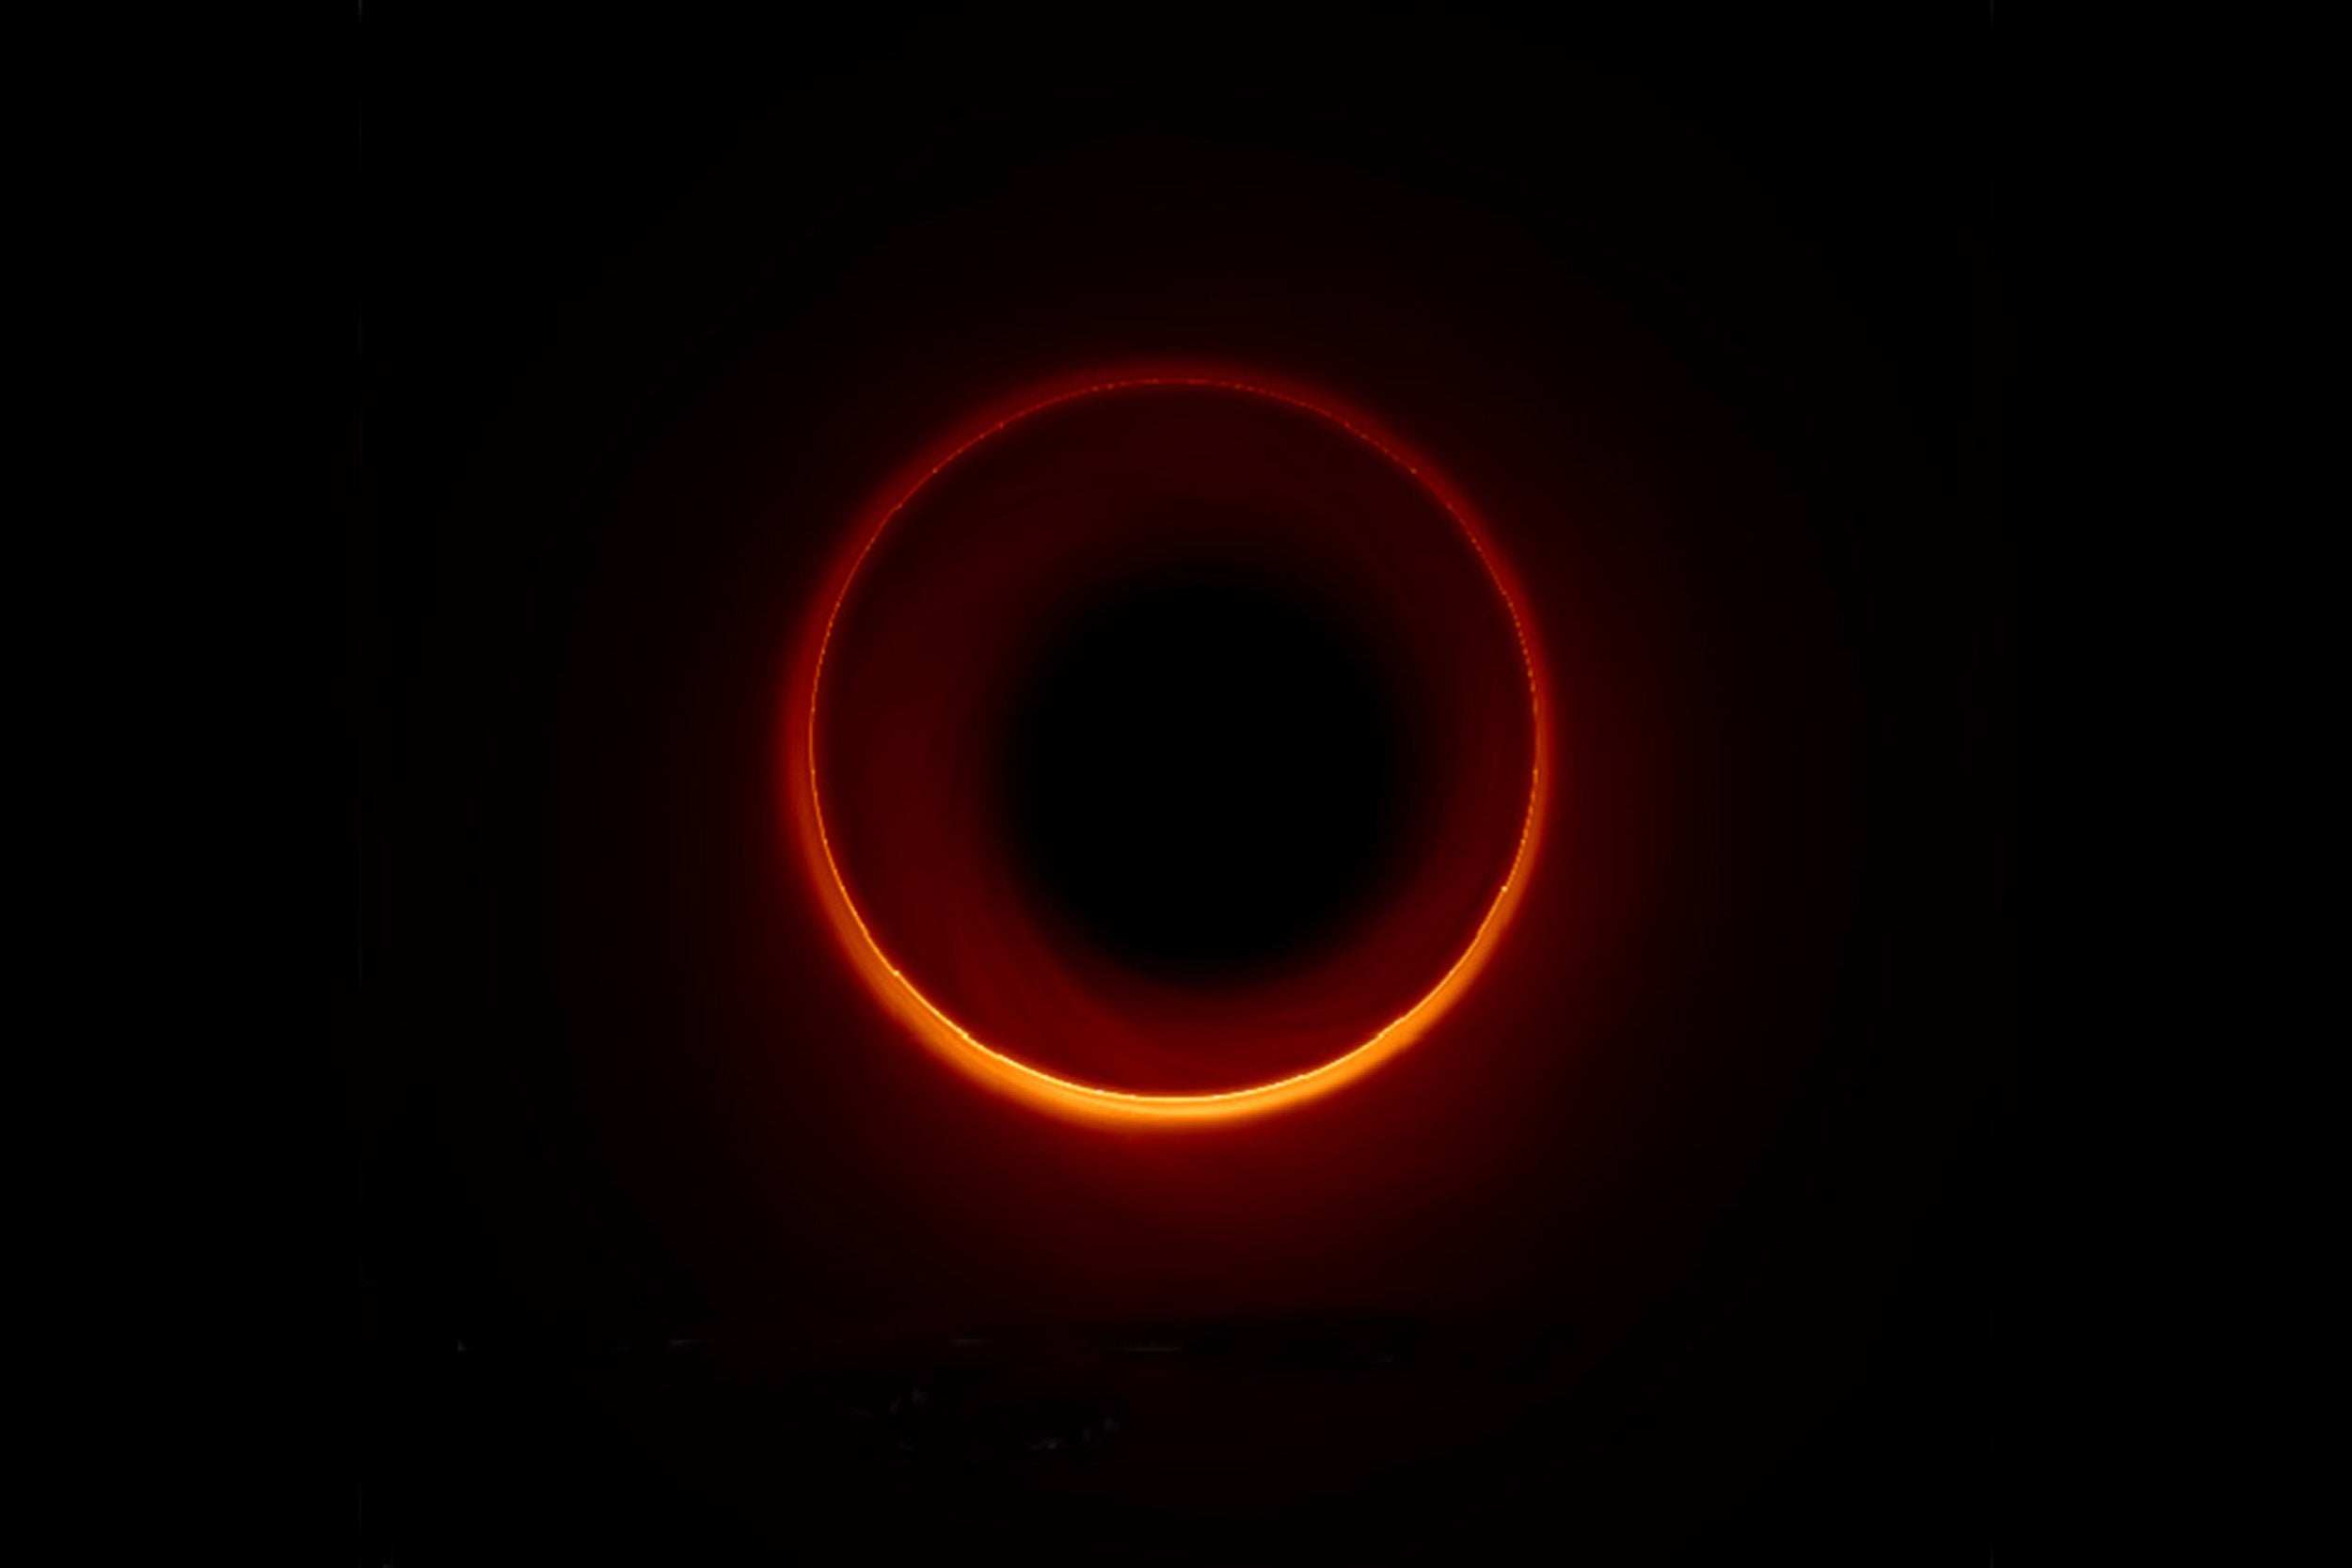 Rings around a black hole.